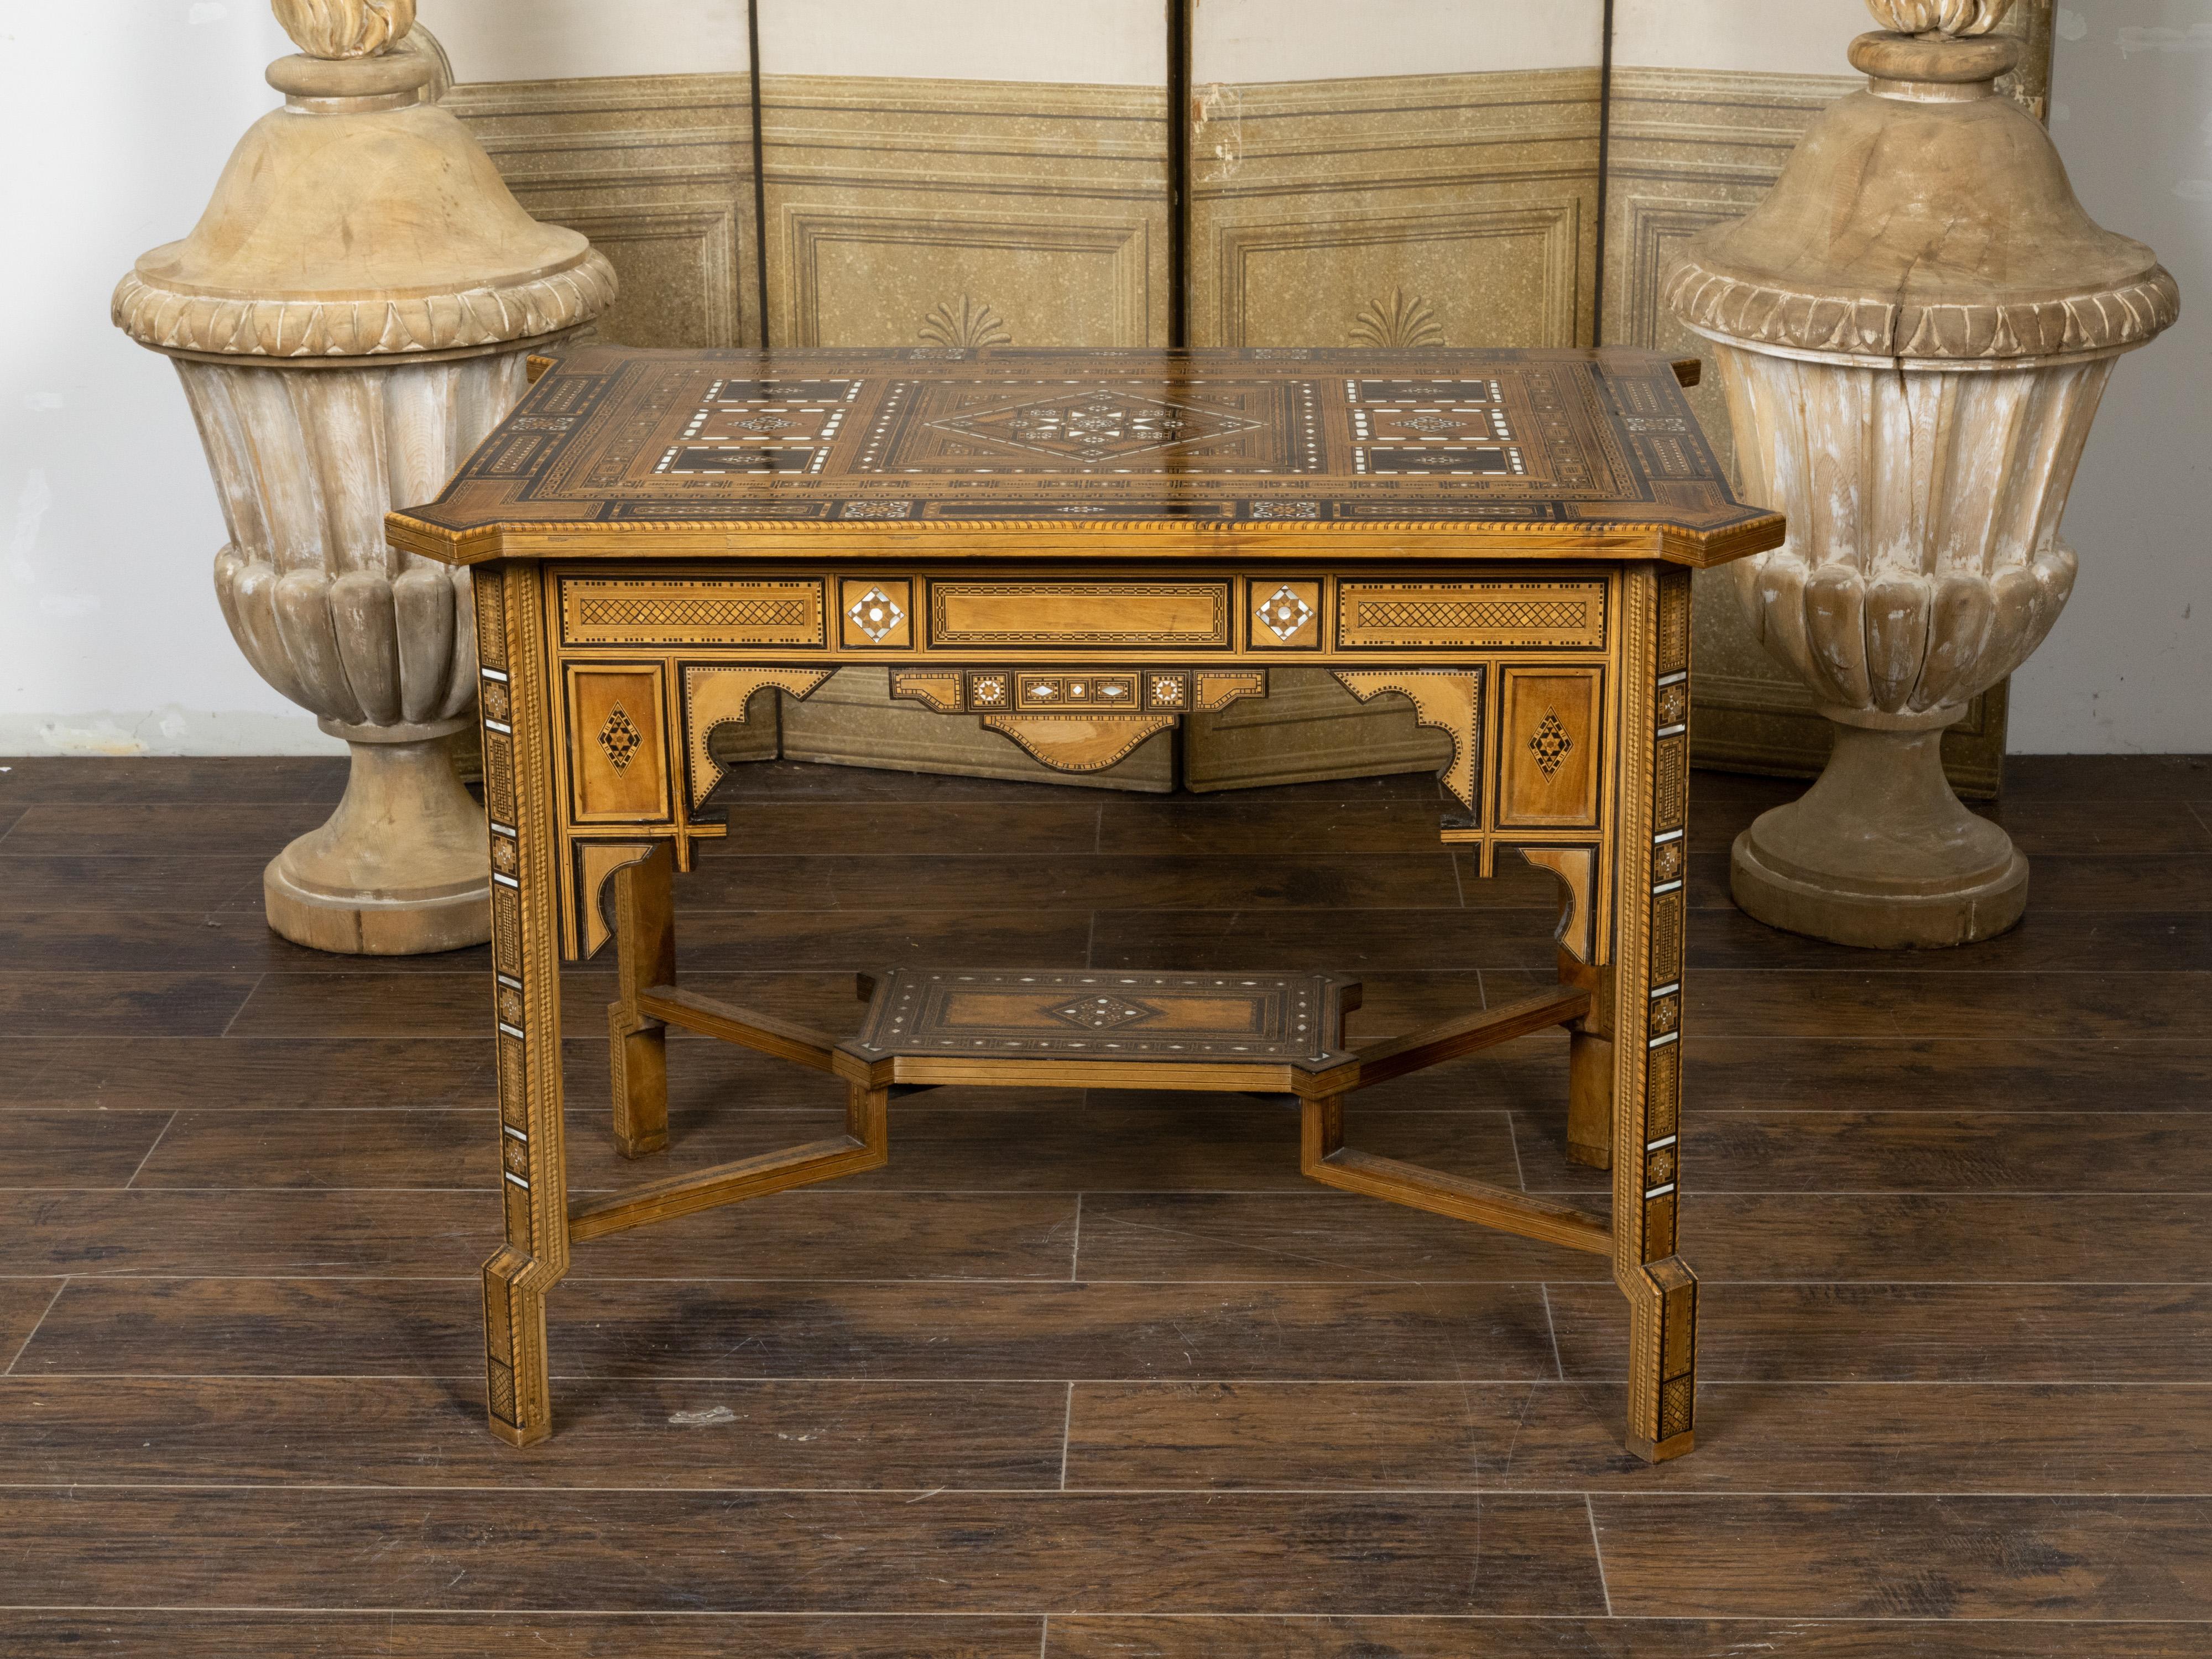 A Moroccan Moorish style center table from the early 20th century, with inlaid wood and mother of pearl geometric motifs. Created in Morocco during the first quarter of the 20th century, this Moorish style center table captures our attention with